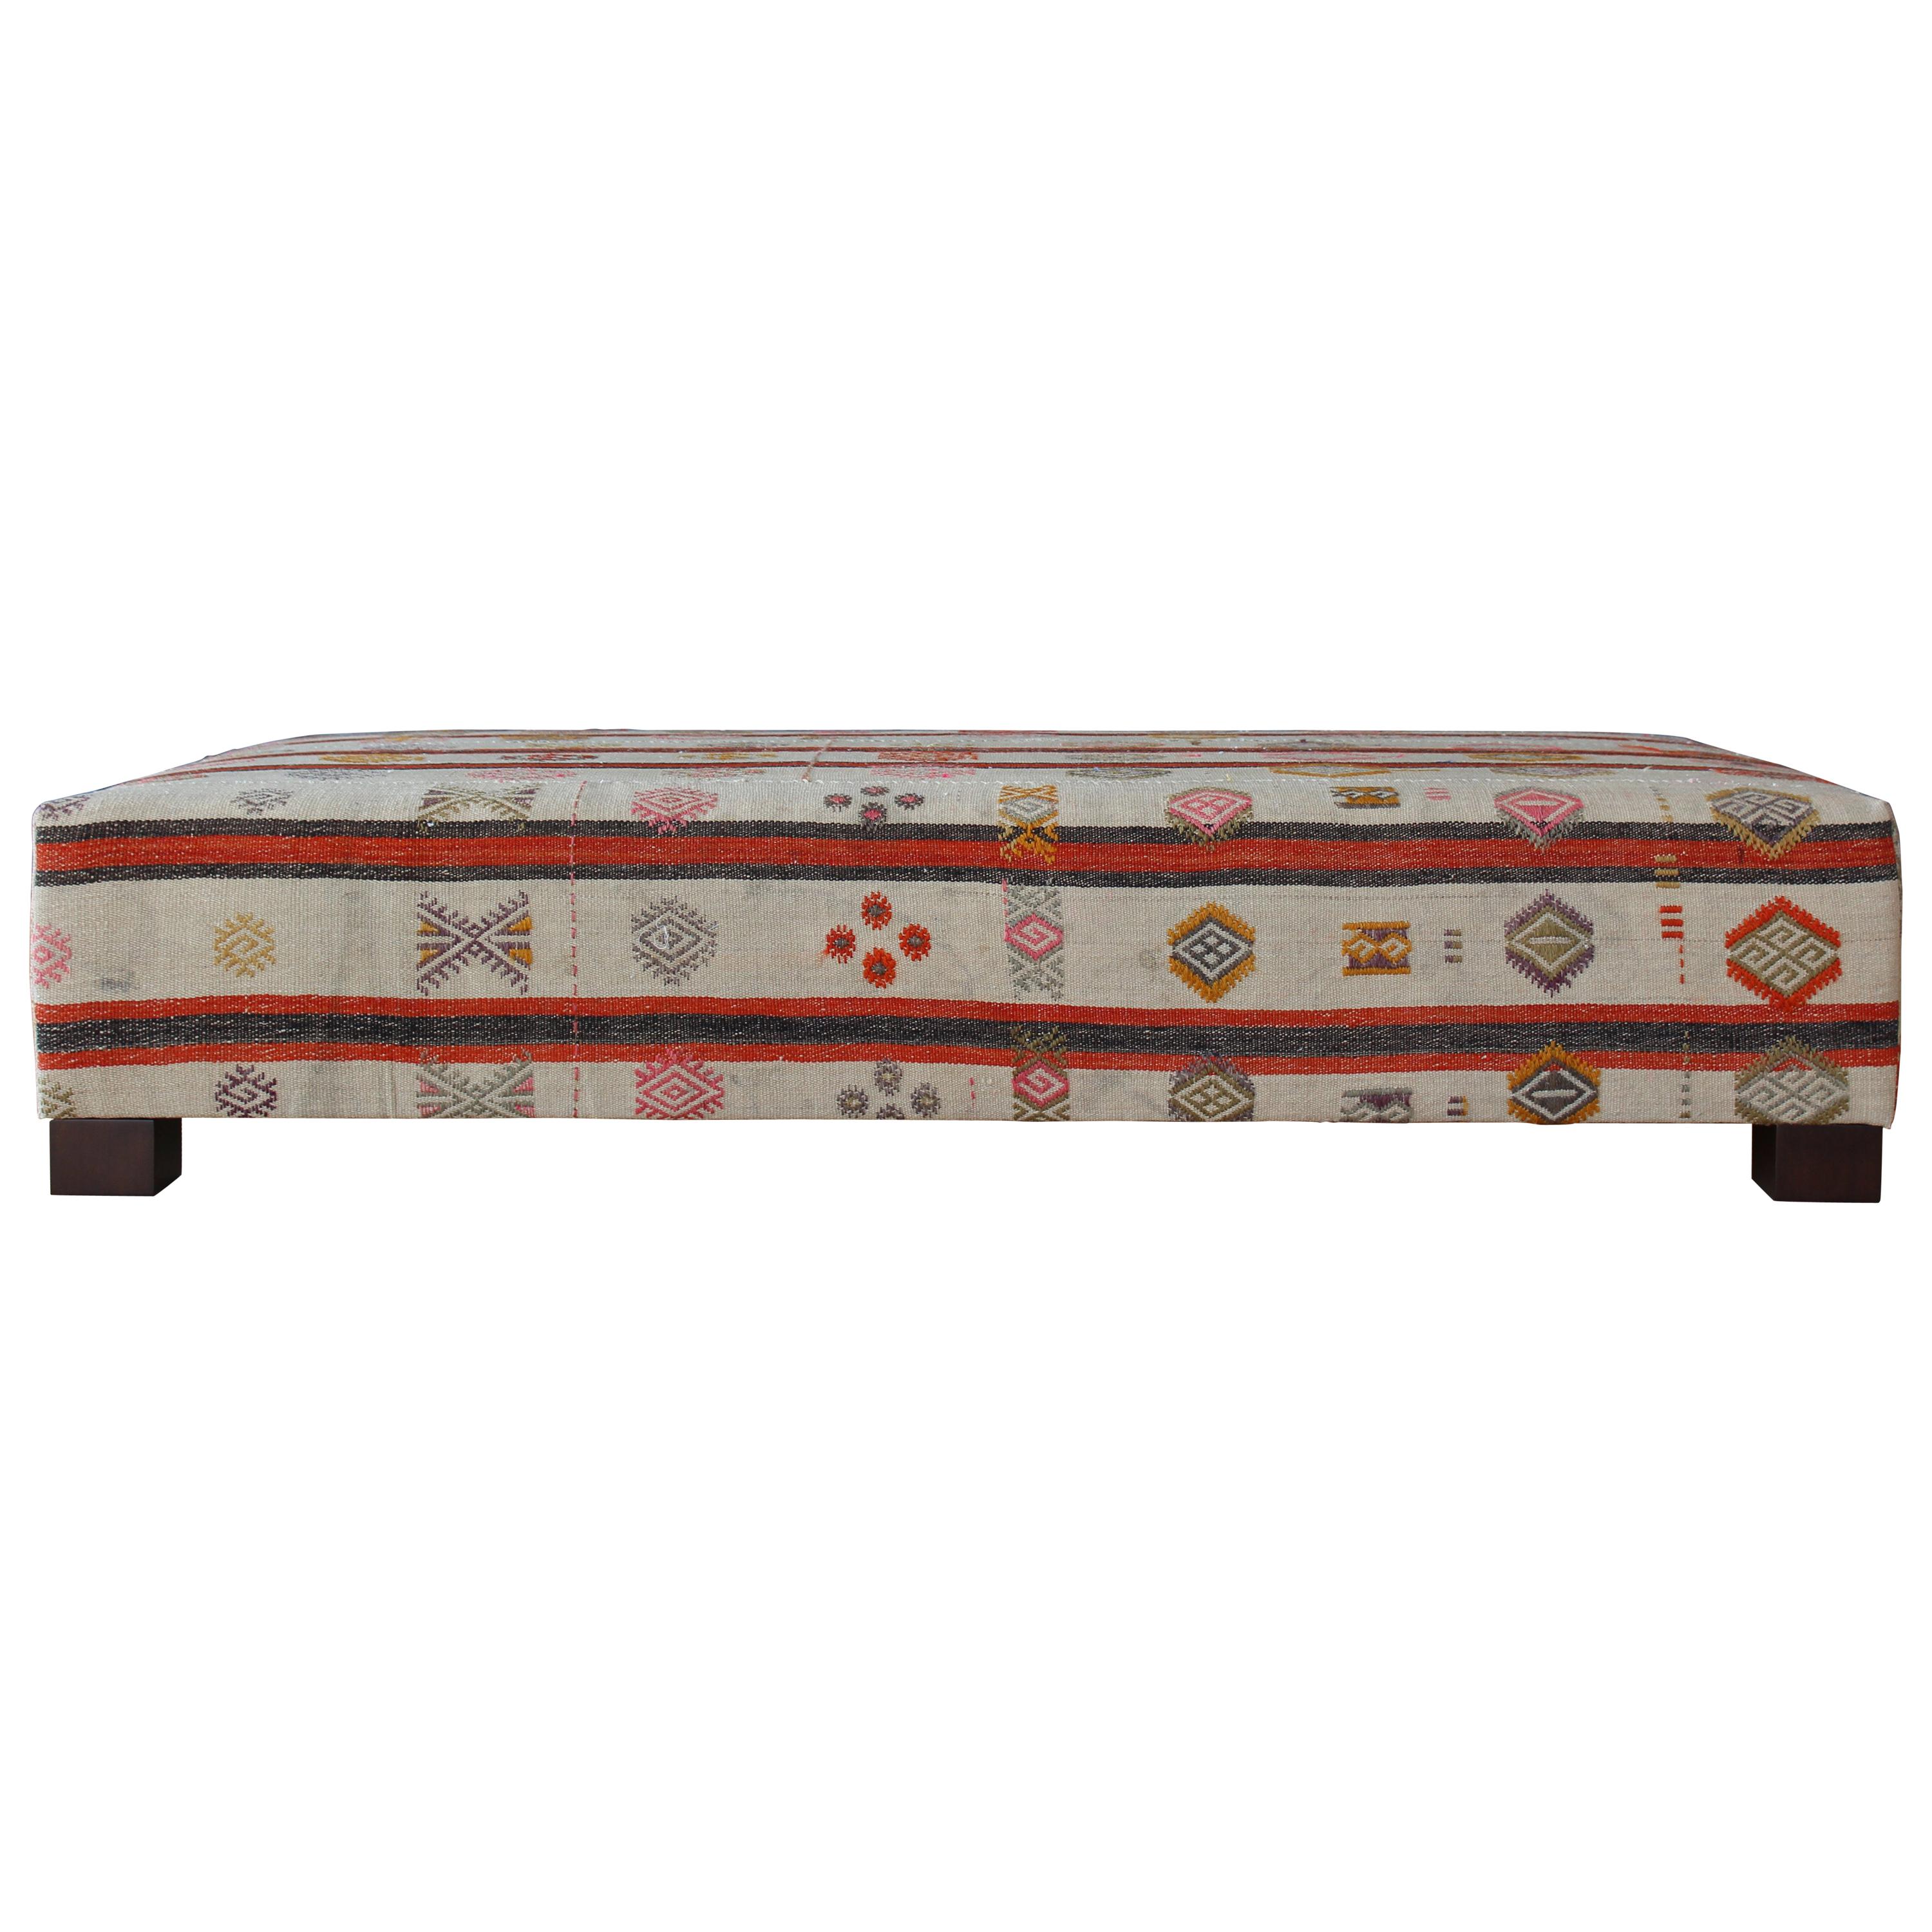 Ottoman Upholstered in a Vintage Rug